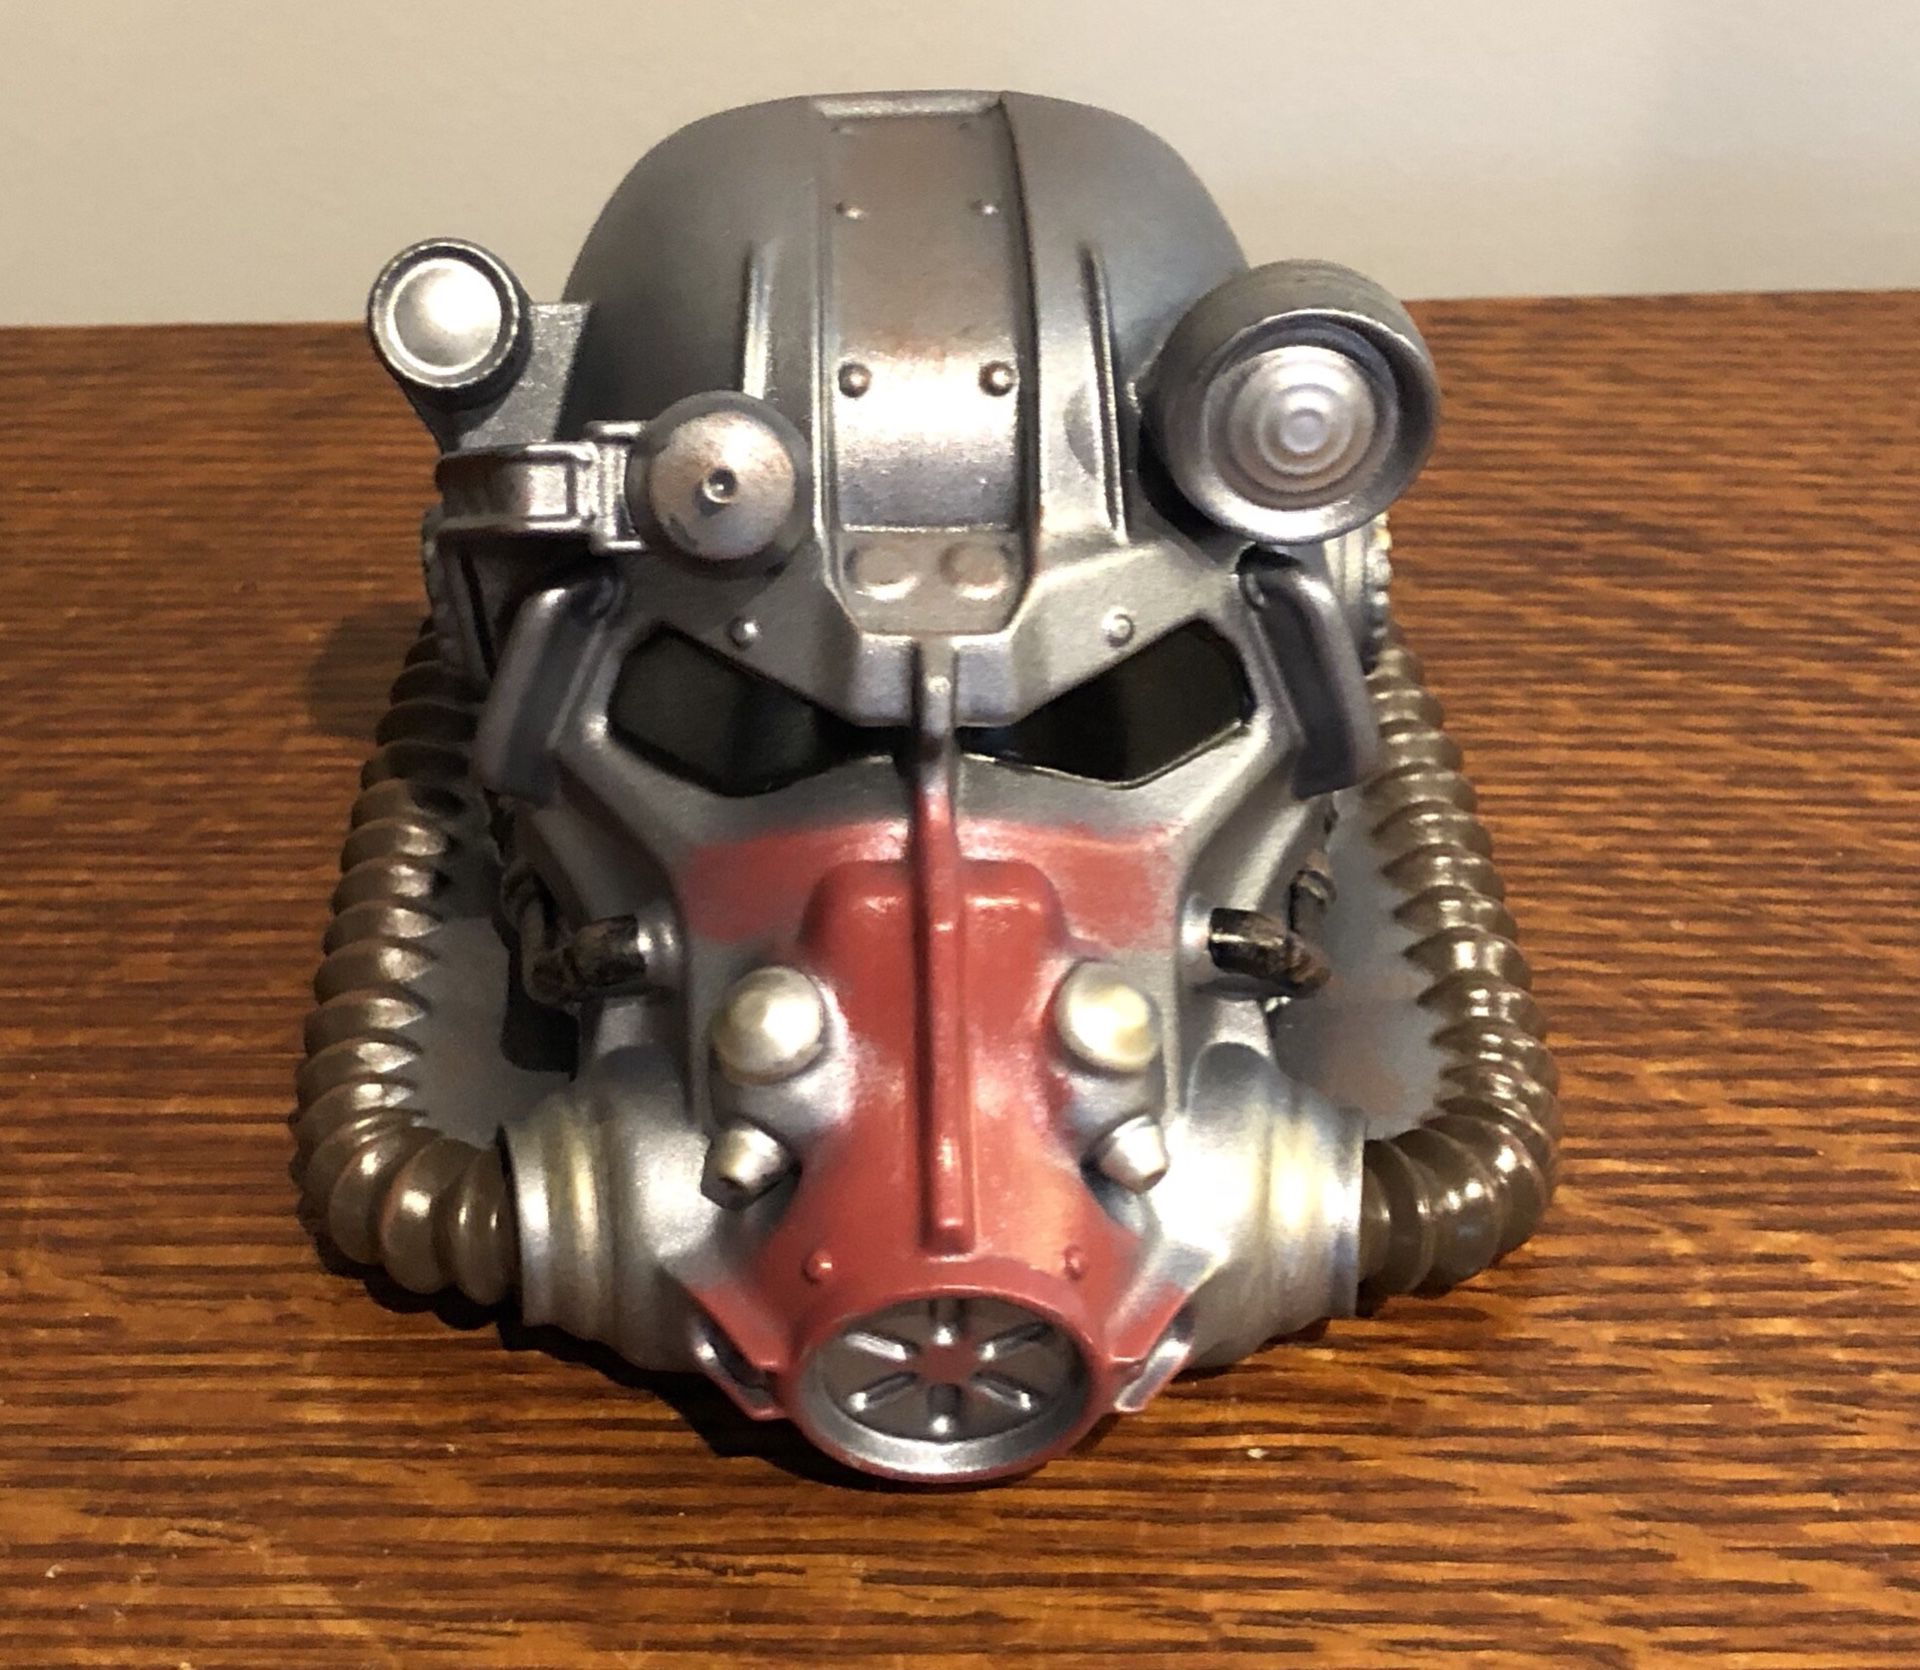 T60 Power Armor Helmet Bank Fallout 4 For Sale In Highland Park Il Offerup